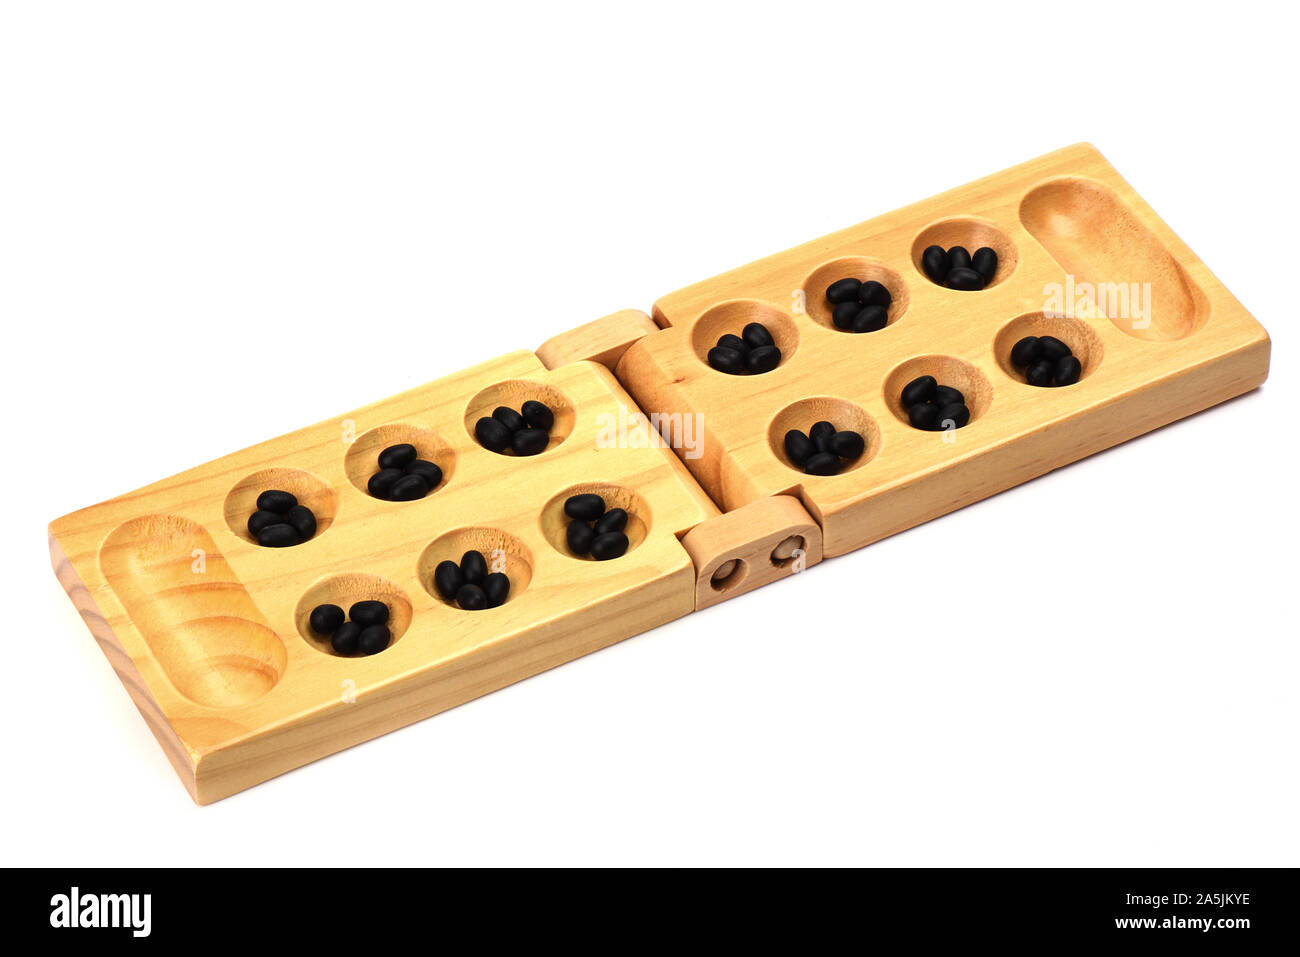 Stones and wooden folding board for playing mancala. Hole stones, the starting position of the game. The concept of board games. Stock Photo